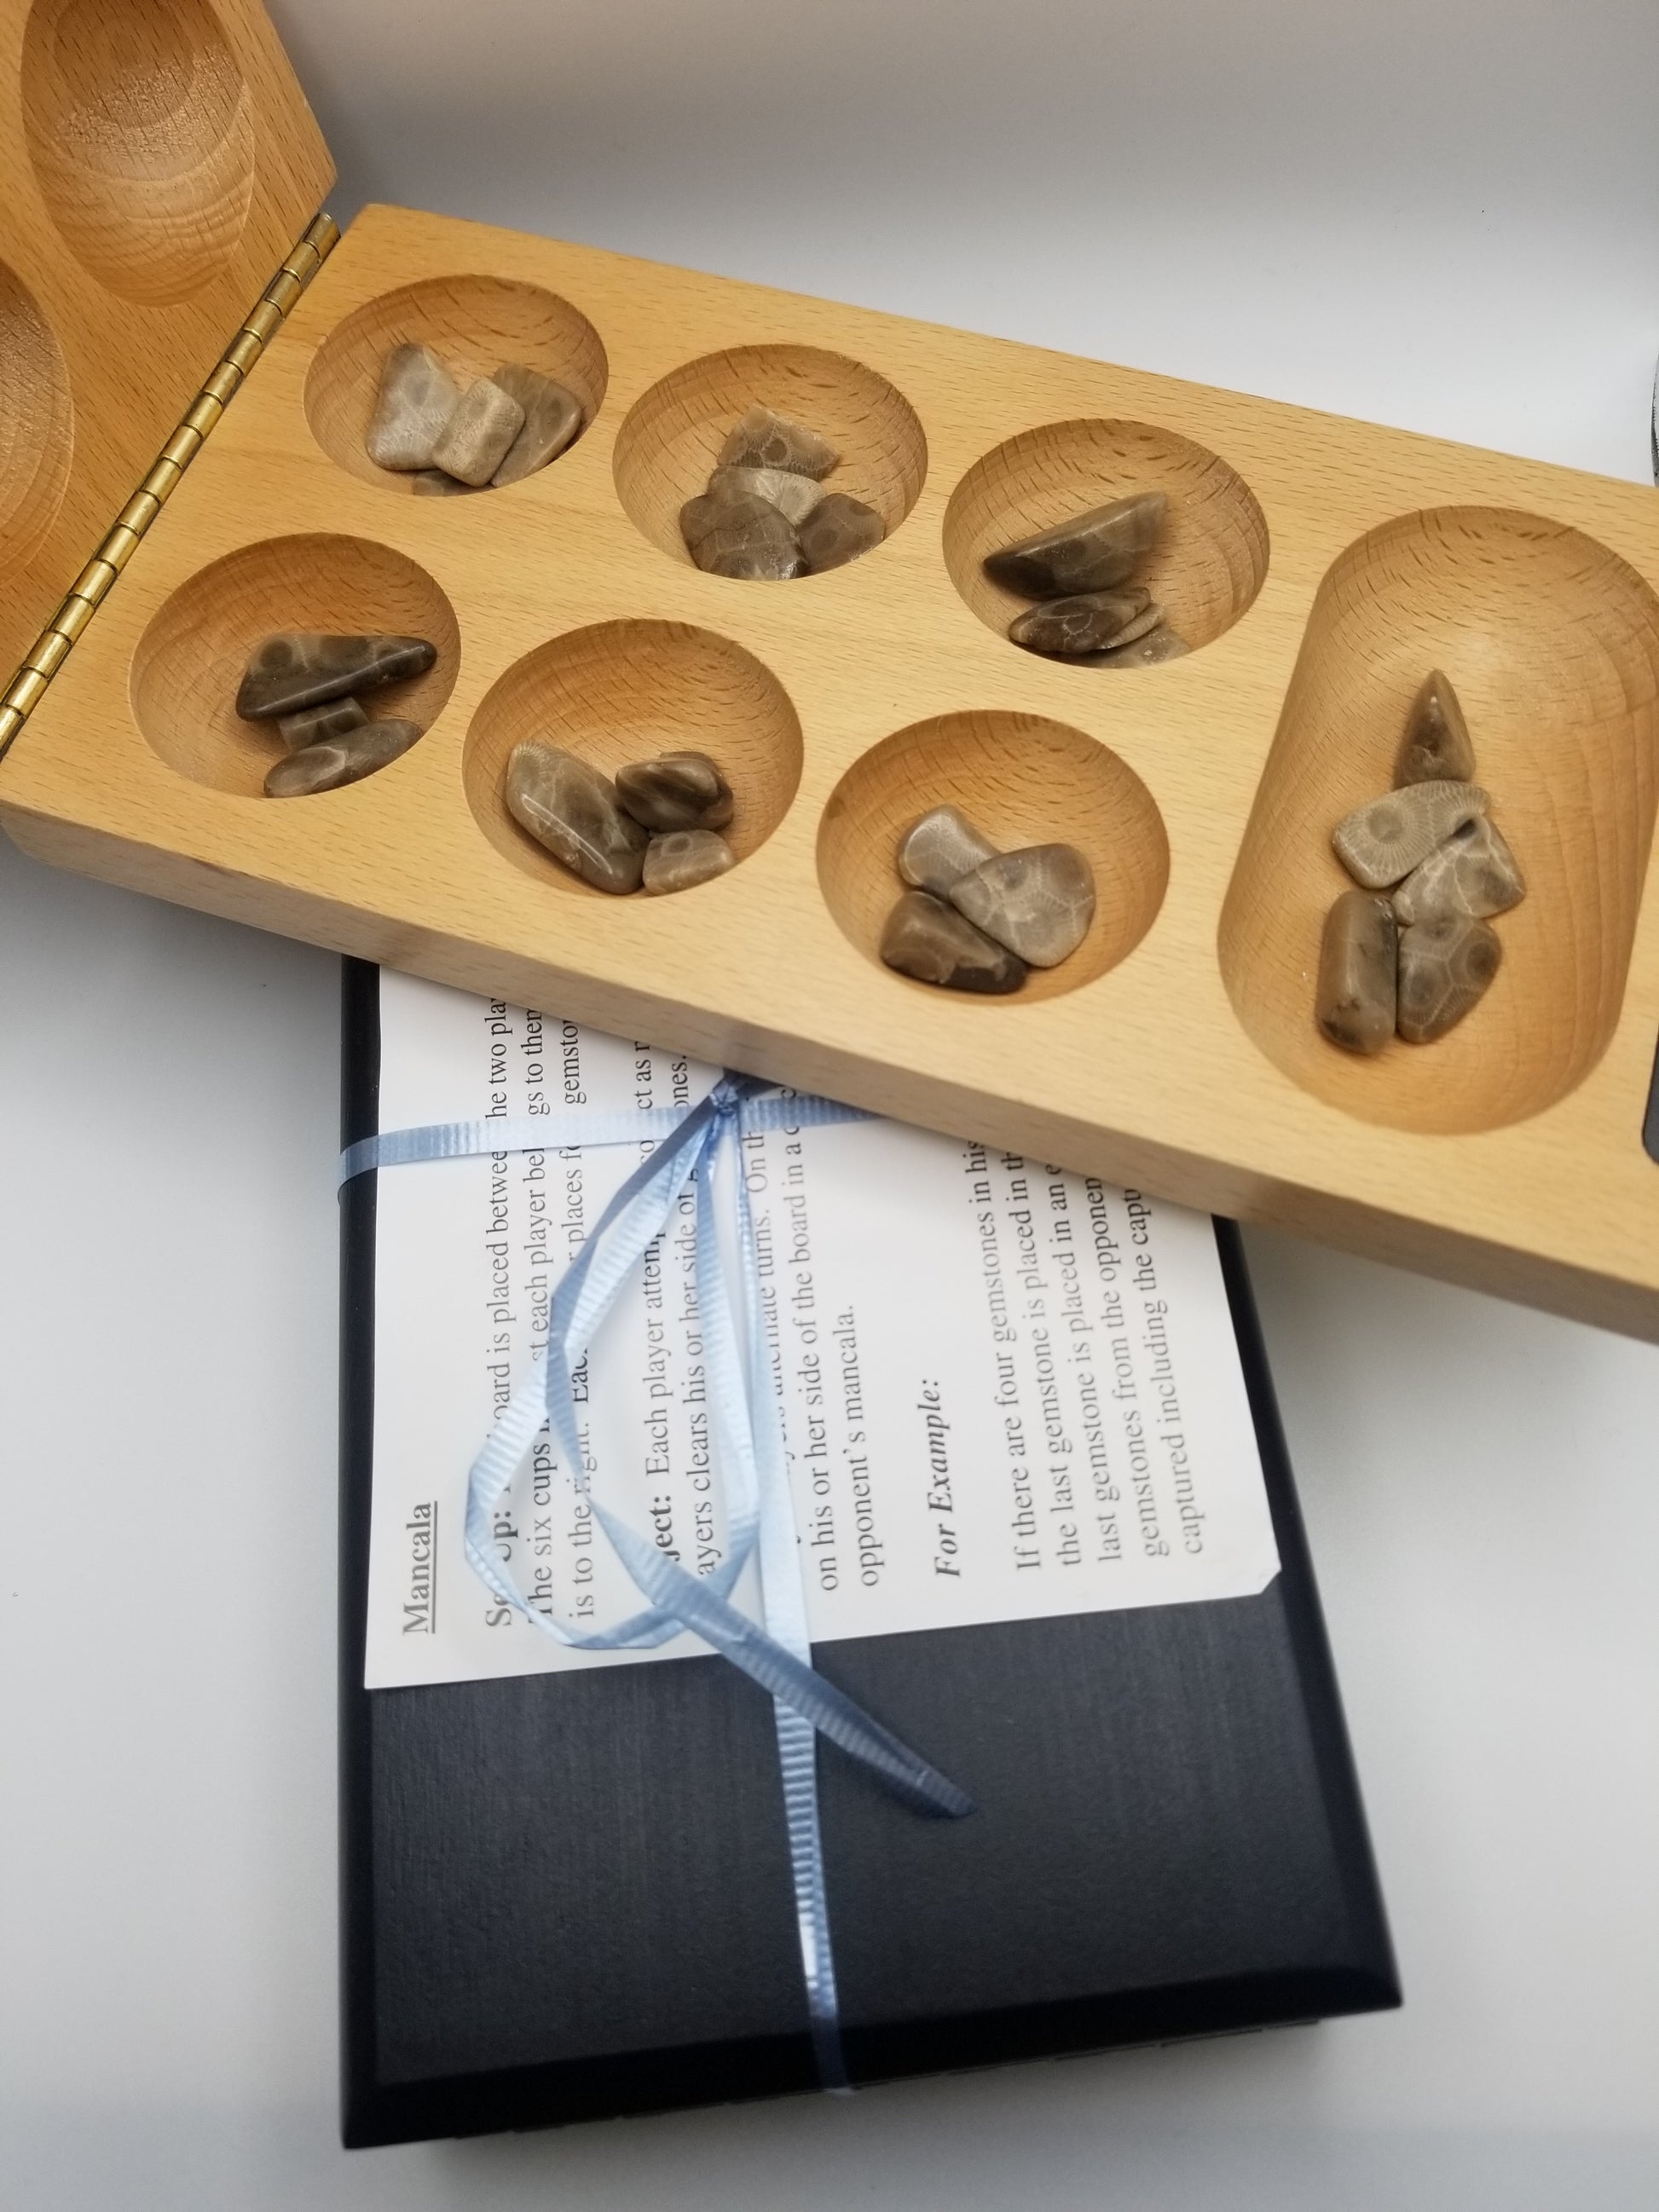 closed up black mancala board with a light blue ribbon wrapped around it and mancala game instructions on top. On top of that is an opened tan mancala board showing off the petoskey stone pebble game pieces in each indented space.